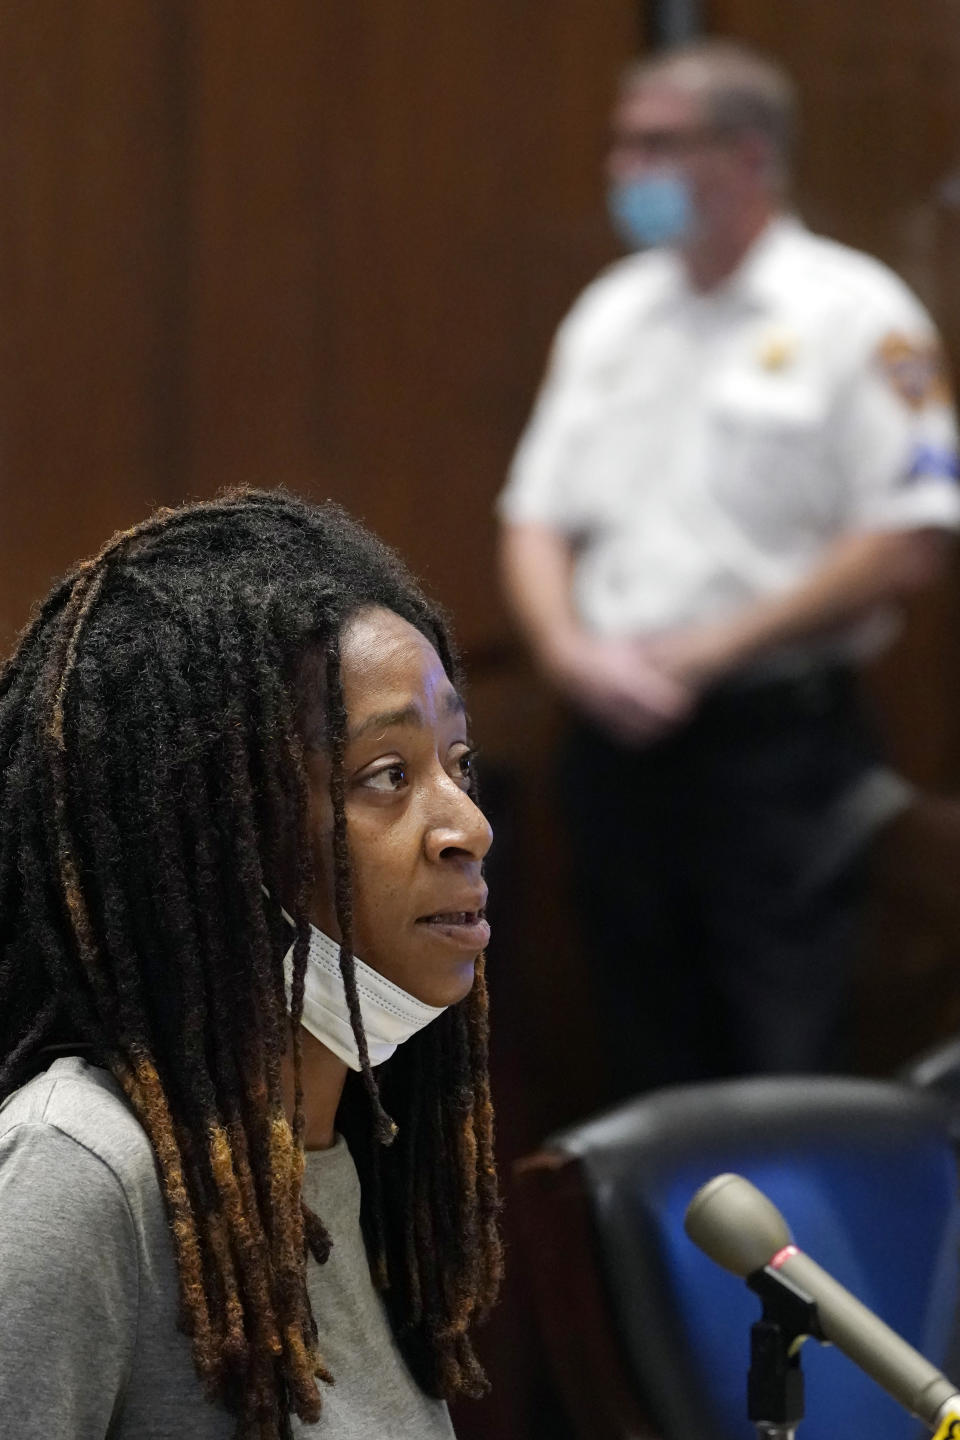 Tiffany Taylor, left, who survived an attack by Khalil Wheeler-Weaver speaks during his sentencing in Newark, N.J., Wednesday, Oct. 6, 2021. Wheeler-Weaver, a New Jersey man who used dating apps to lure and kill three women five years, ago was sentenced Wednesday to 160 years in prison after a trial in which it was revealed that friends of one victim did their own detective work on social media to ferret out the suspect. (AP Photo/Seth Wenig, Pool)